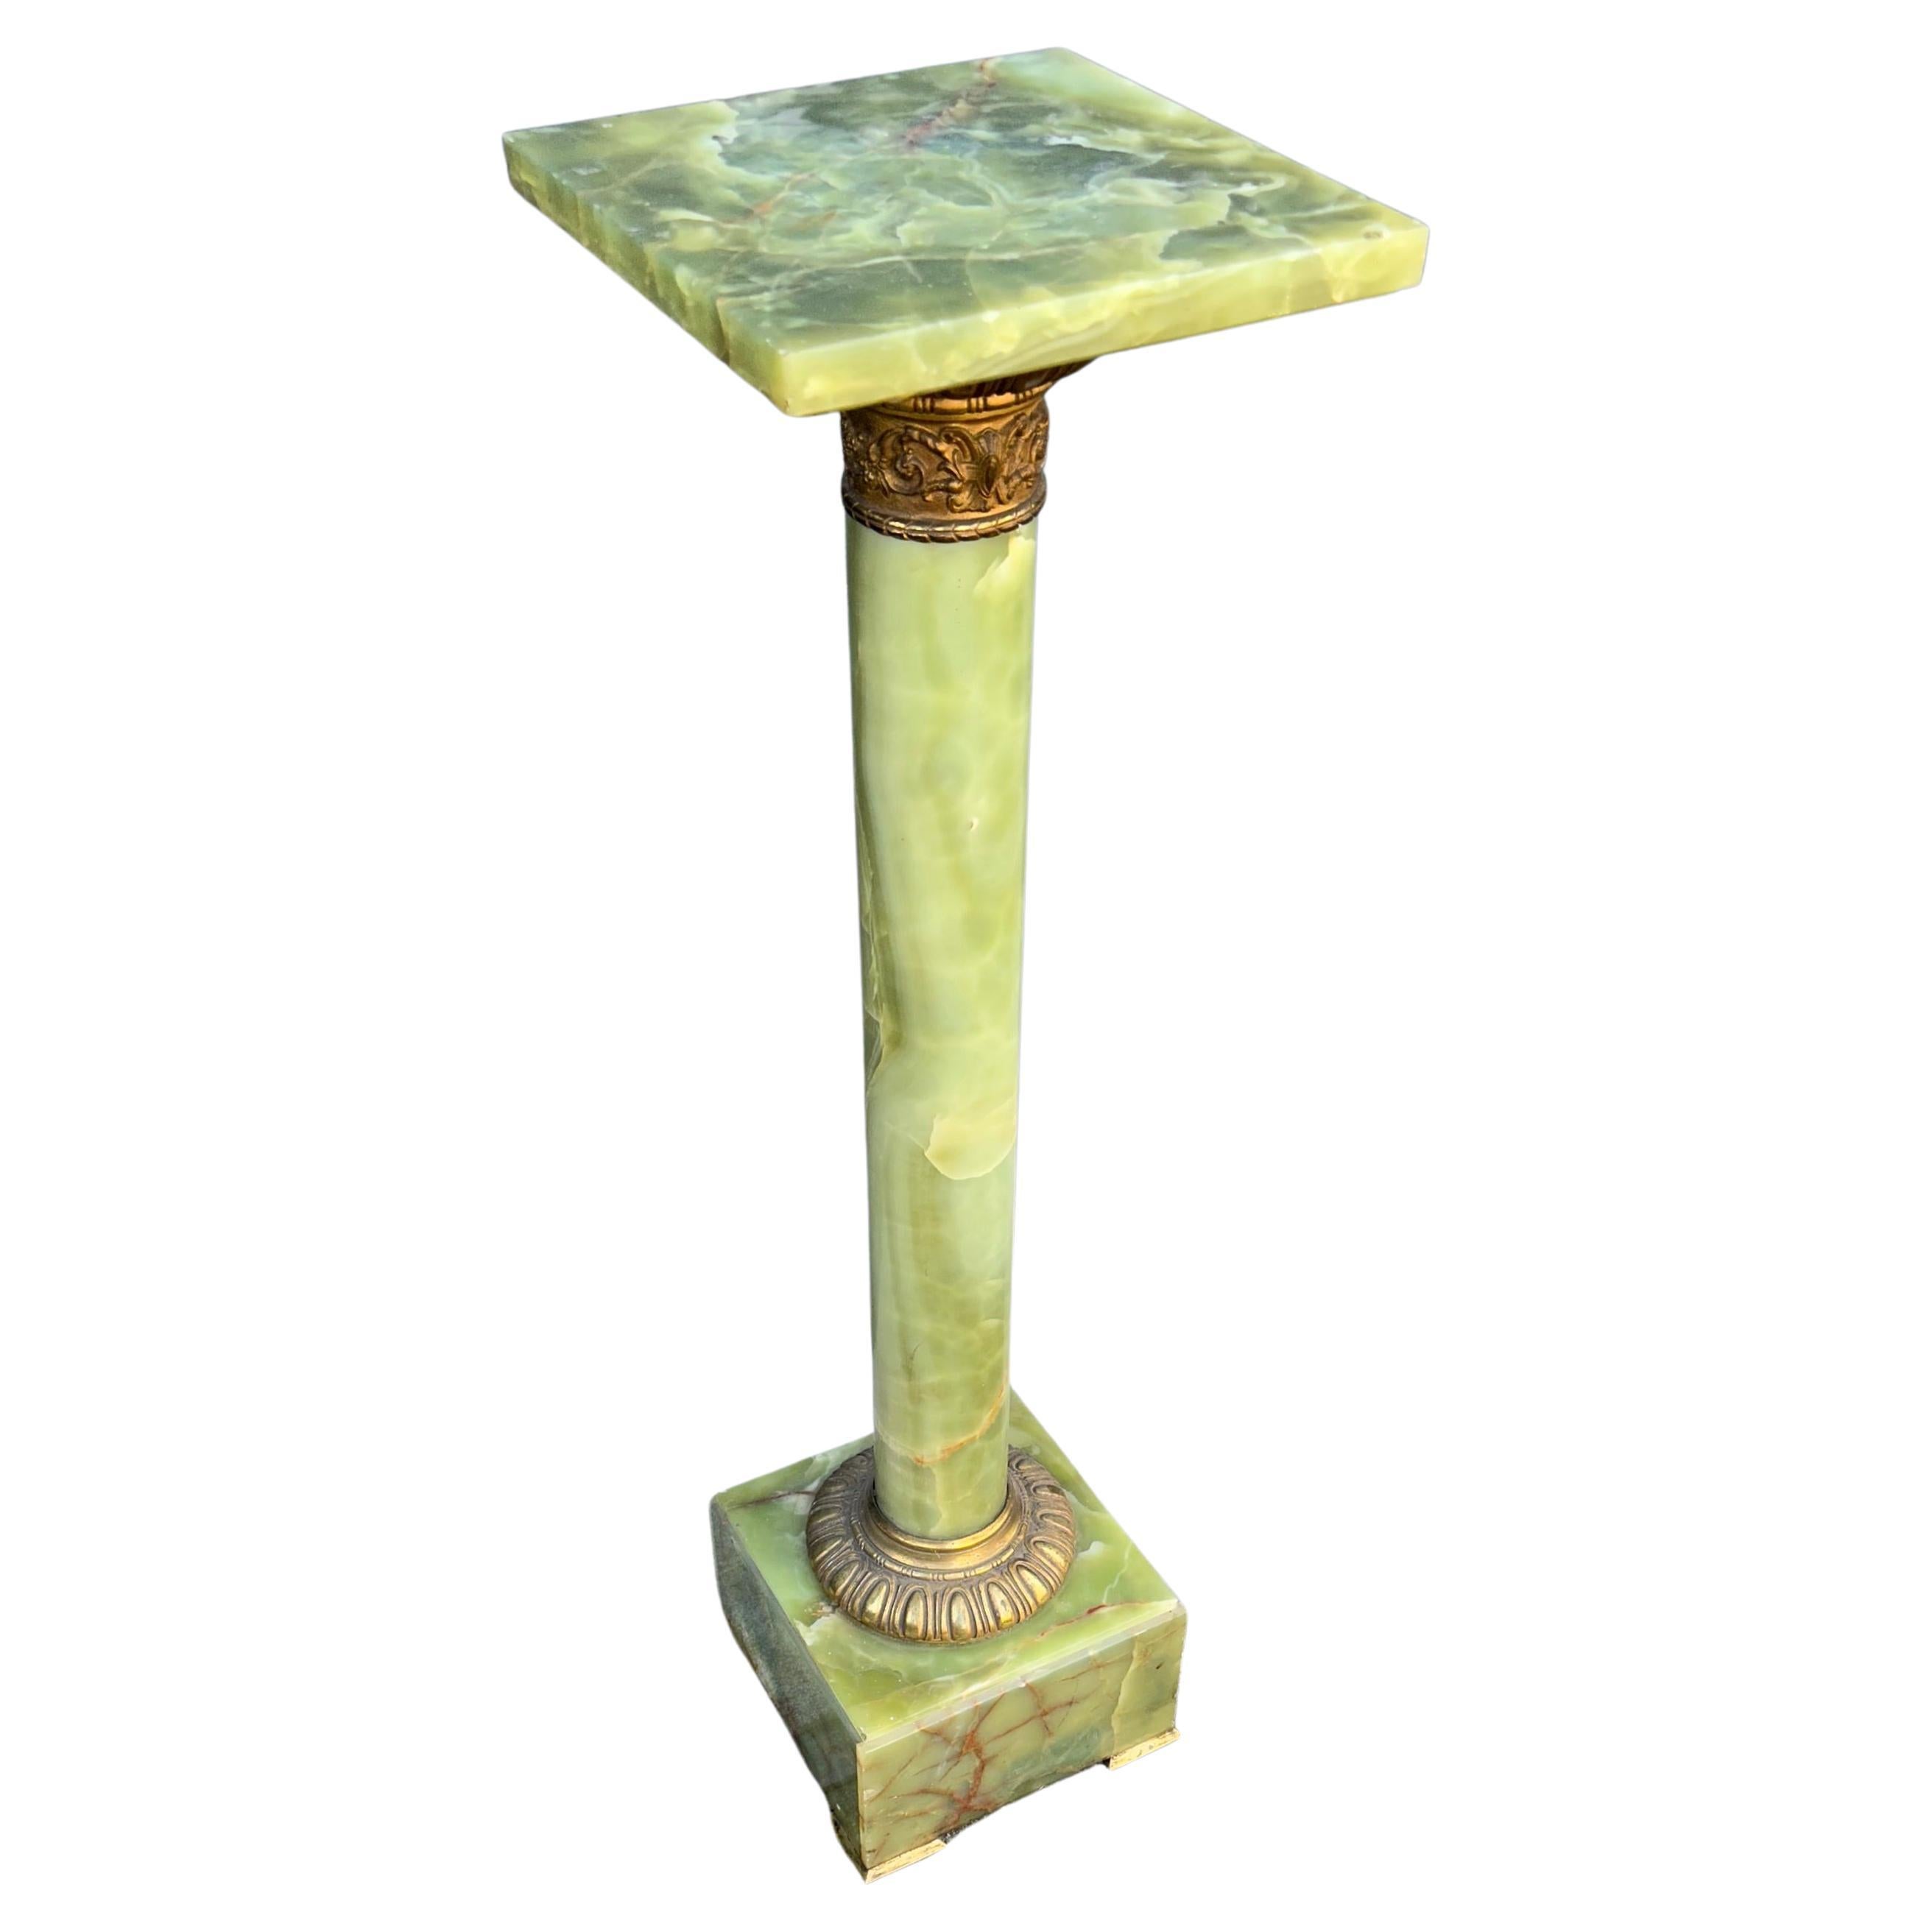 Stylish & Majestic Looking Antique, Green Onyx and Bronze Column Pedestal Stand For Sale